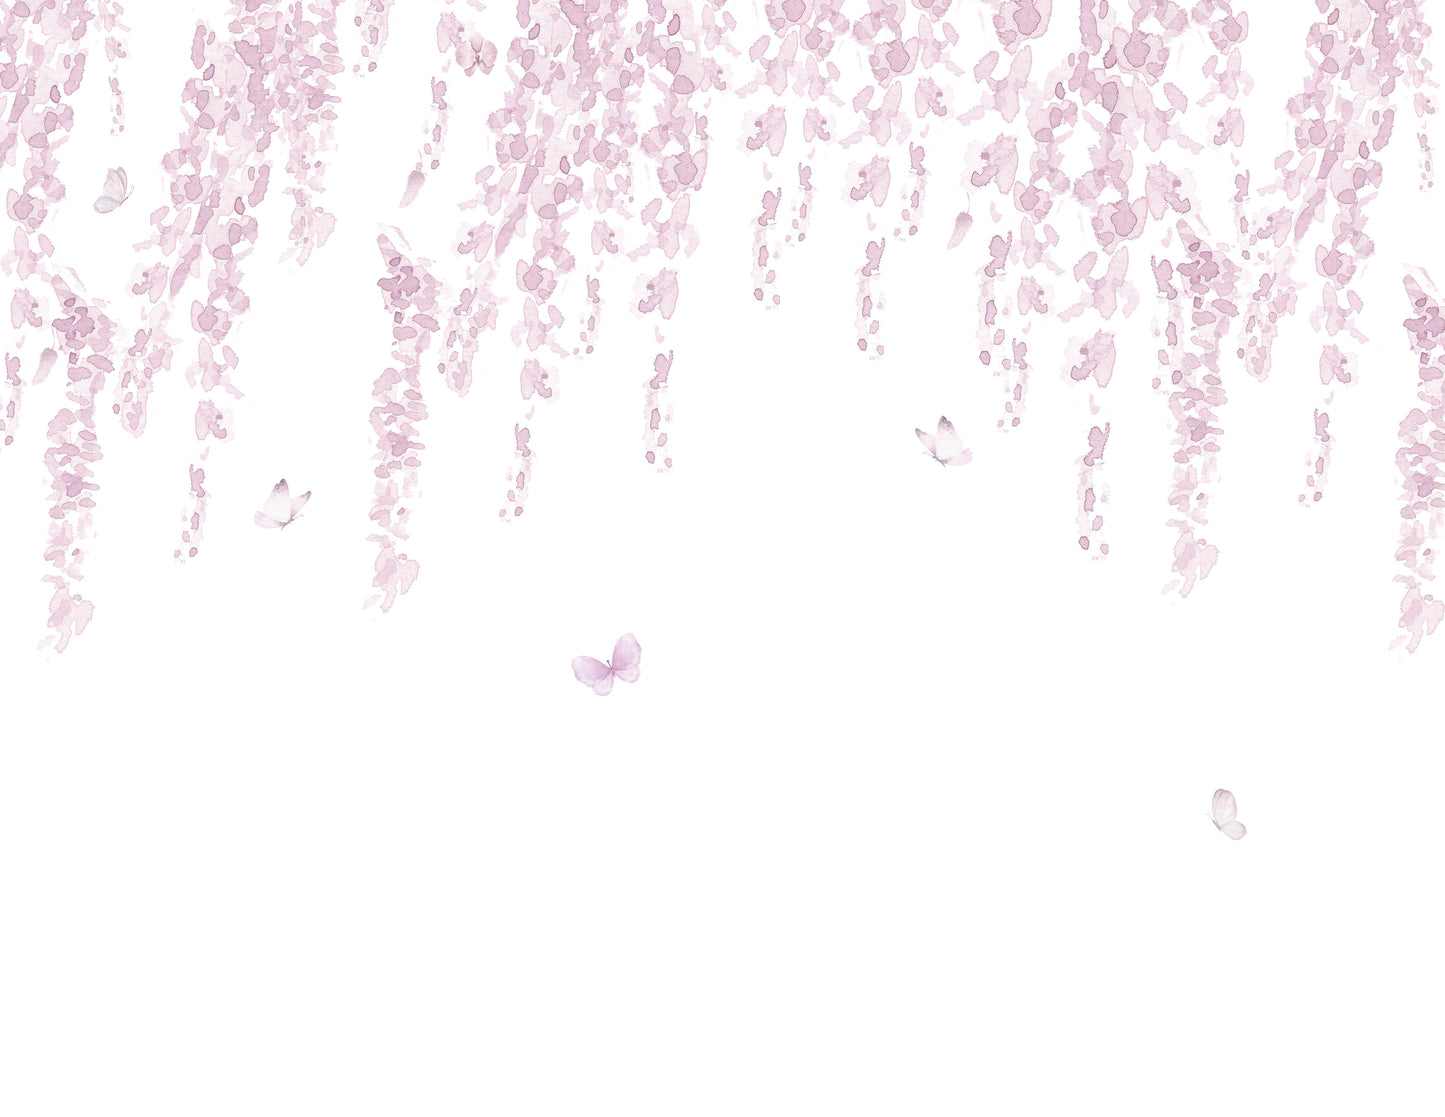 Whimsical Wisteria Wallpaper